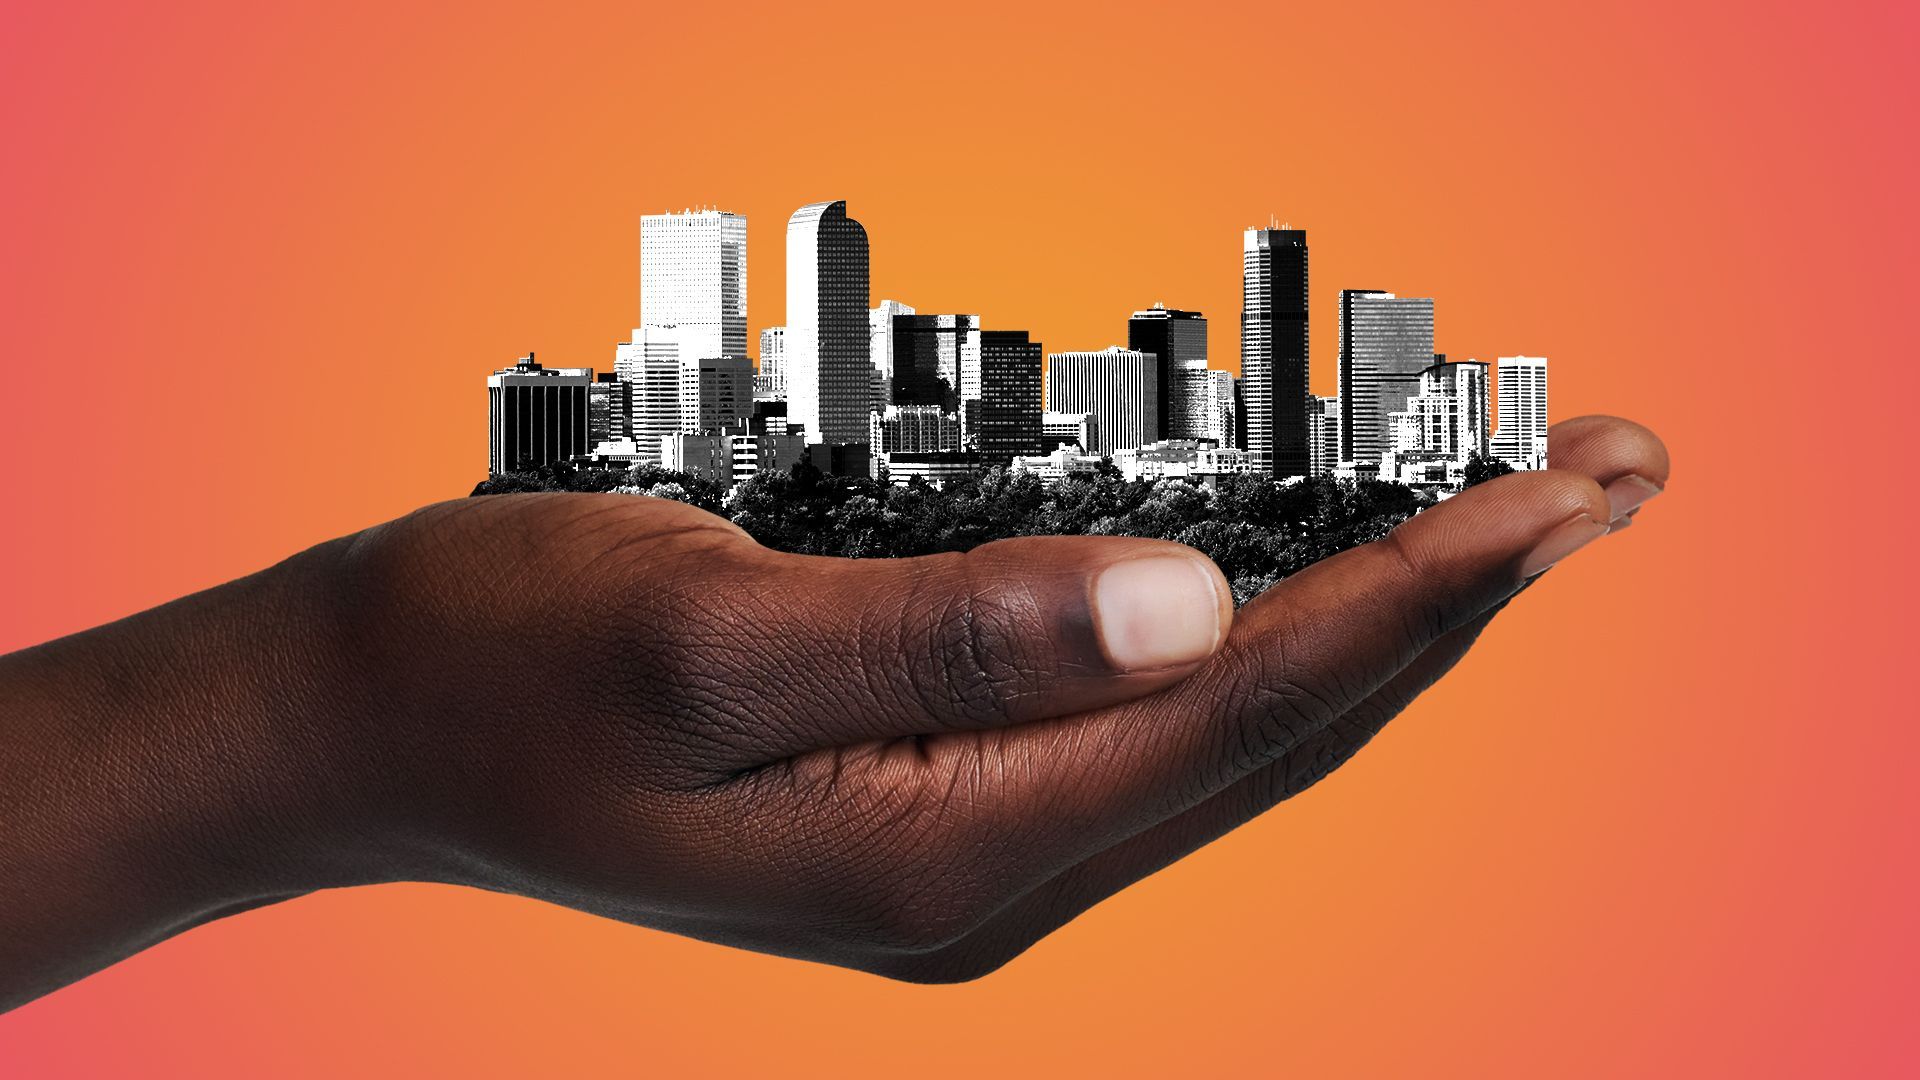 Illustration of a Black woman's hands holding the city of Denver.